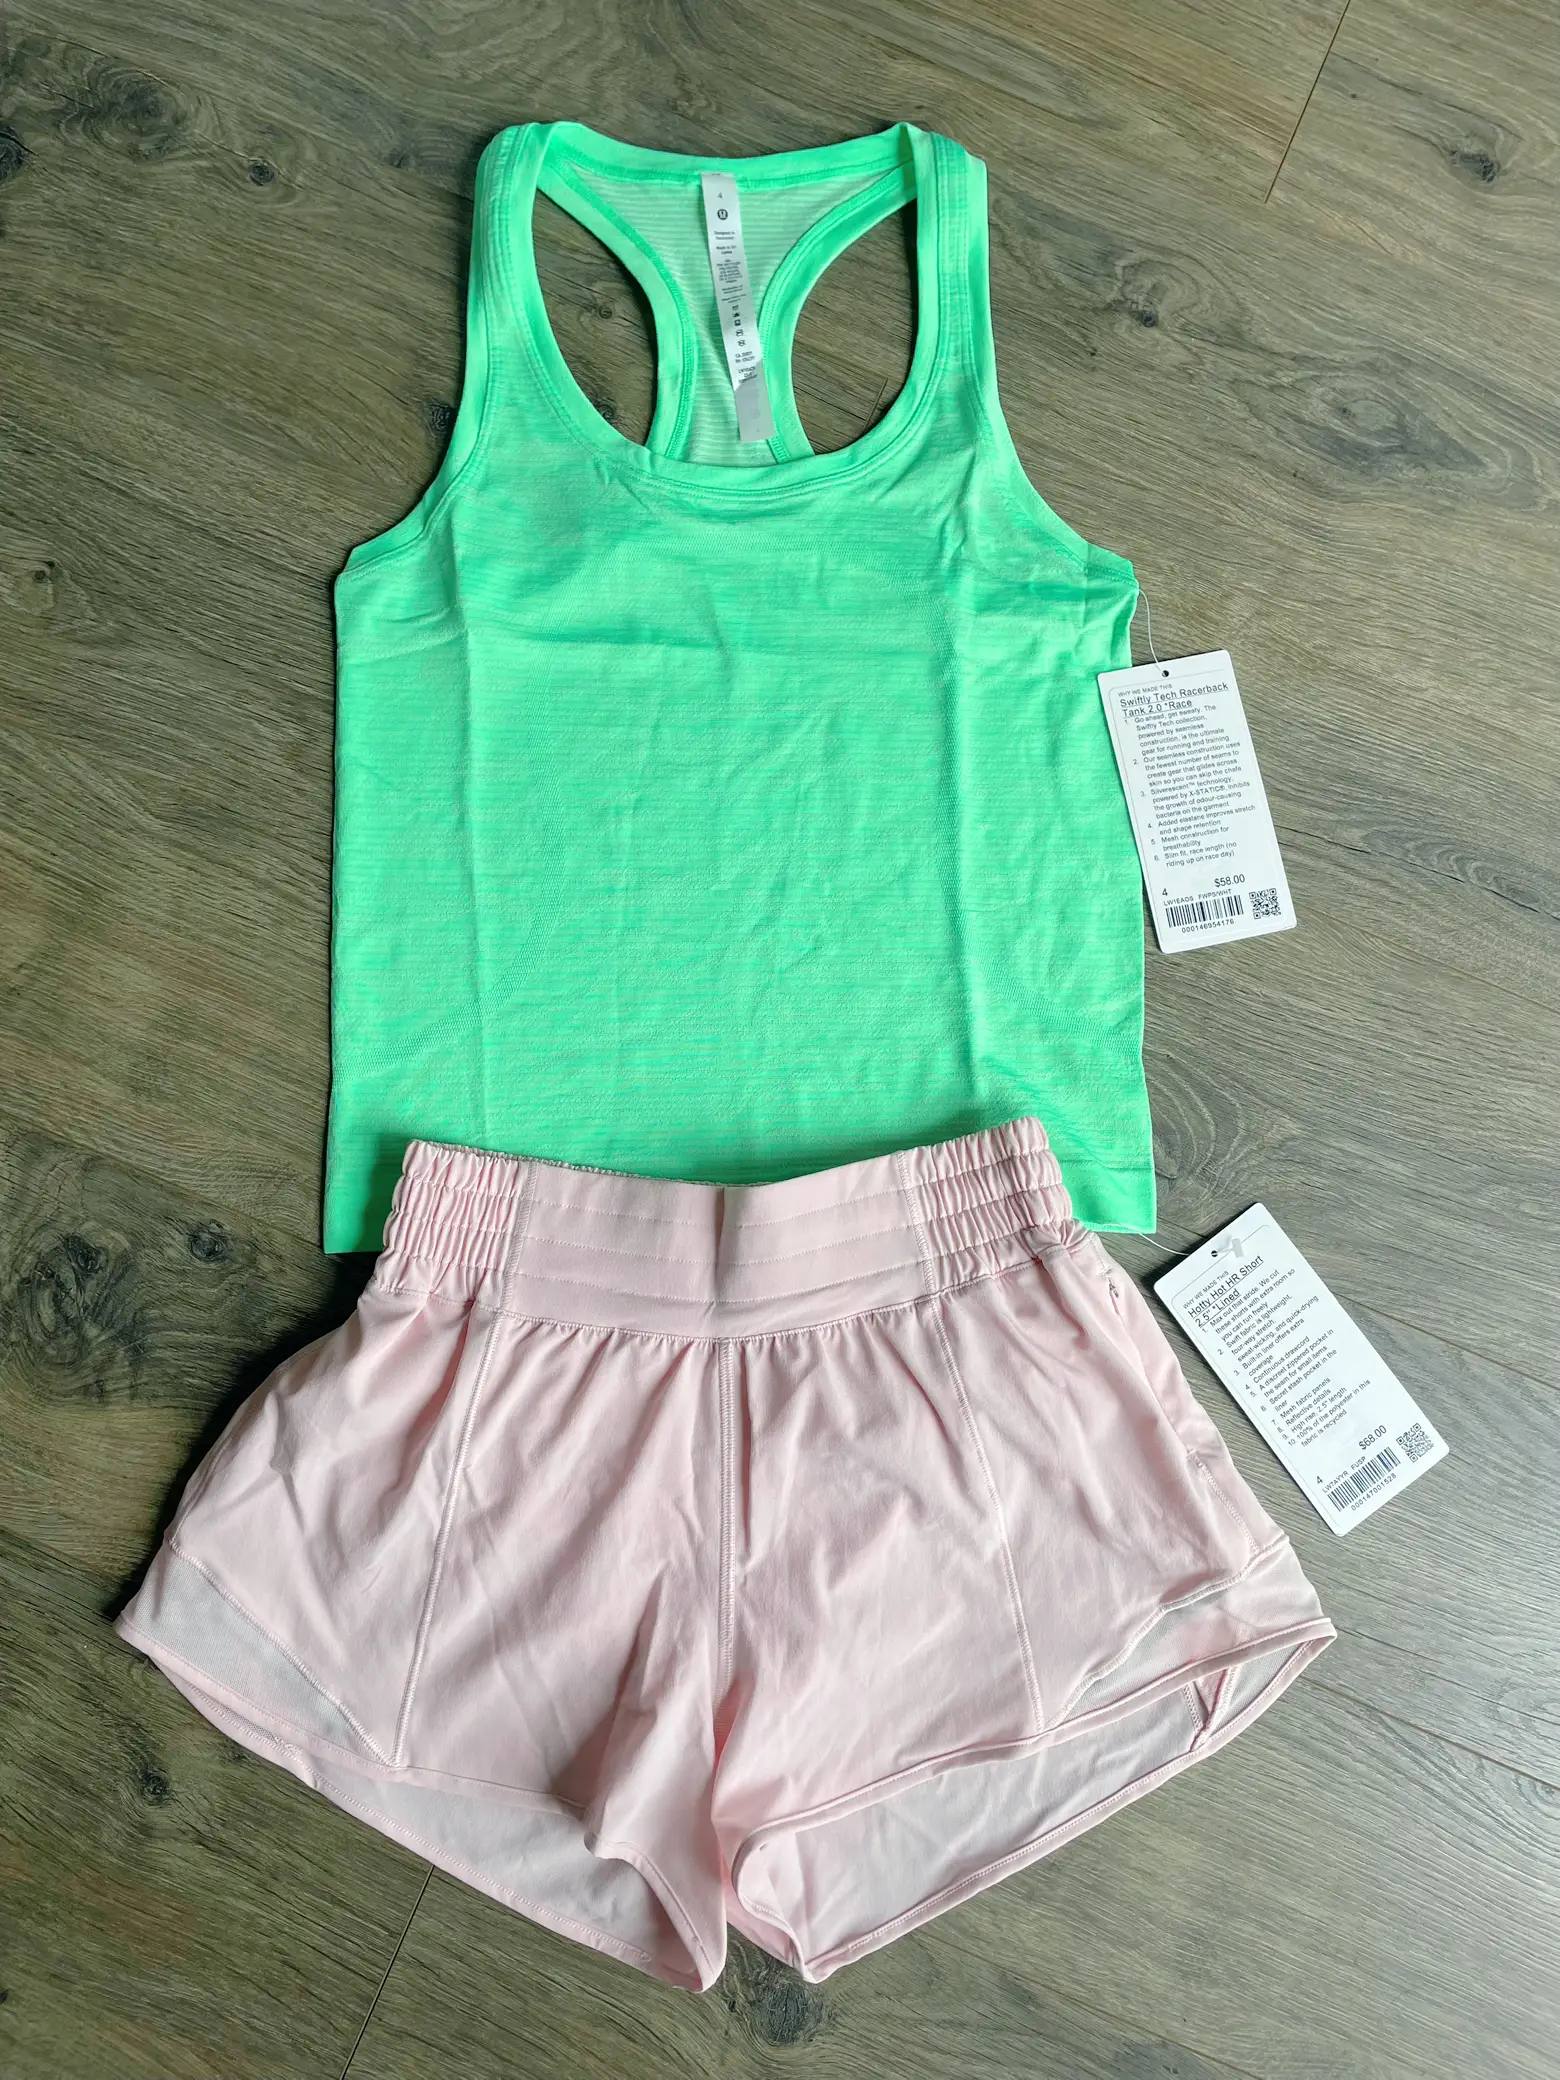 softstreme HR short size 4 versus relaxed shorts size 2 and 4 : r